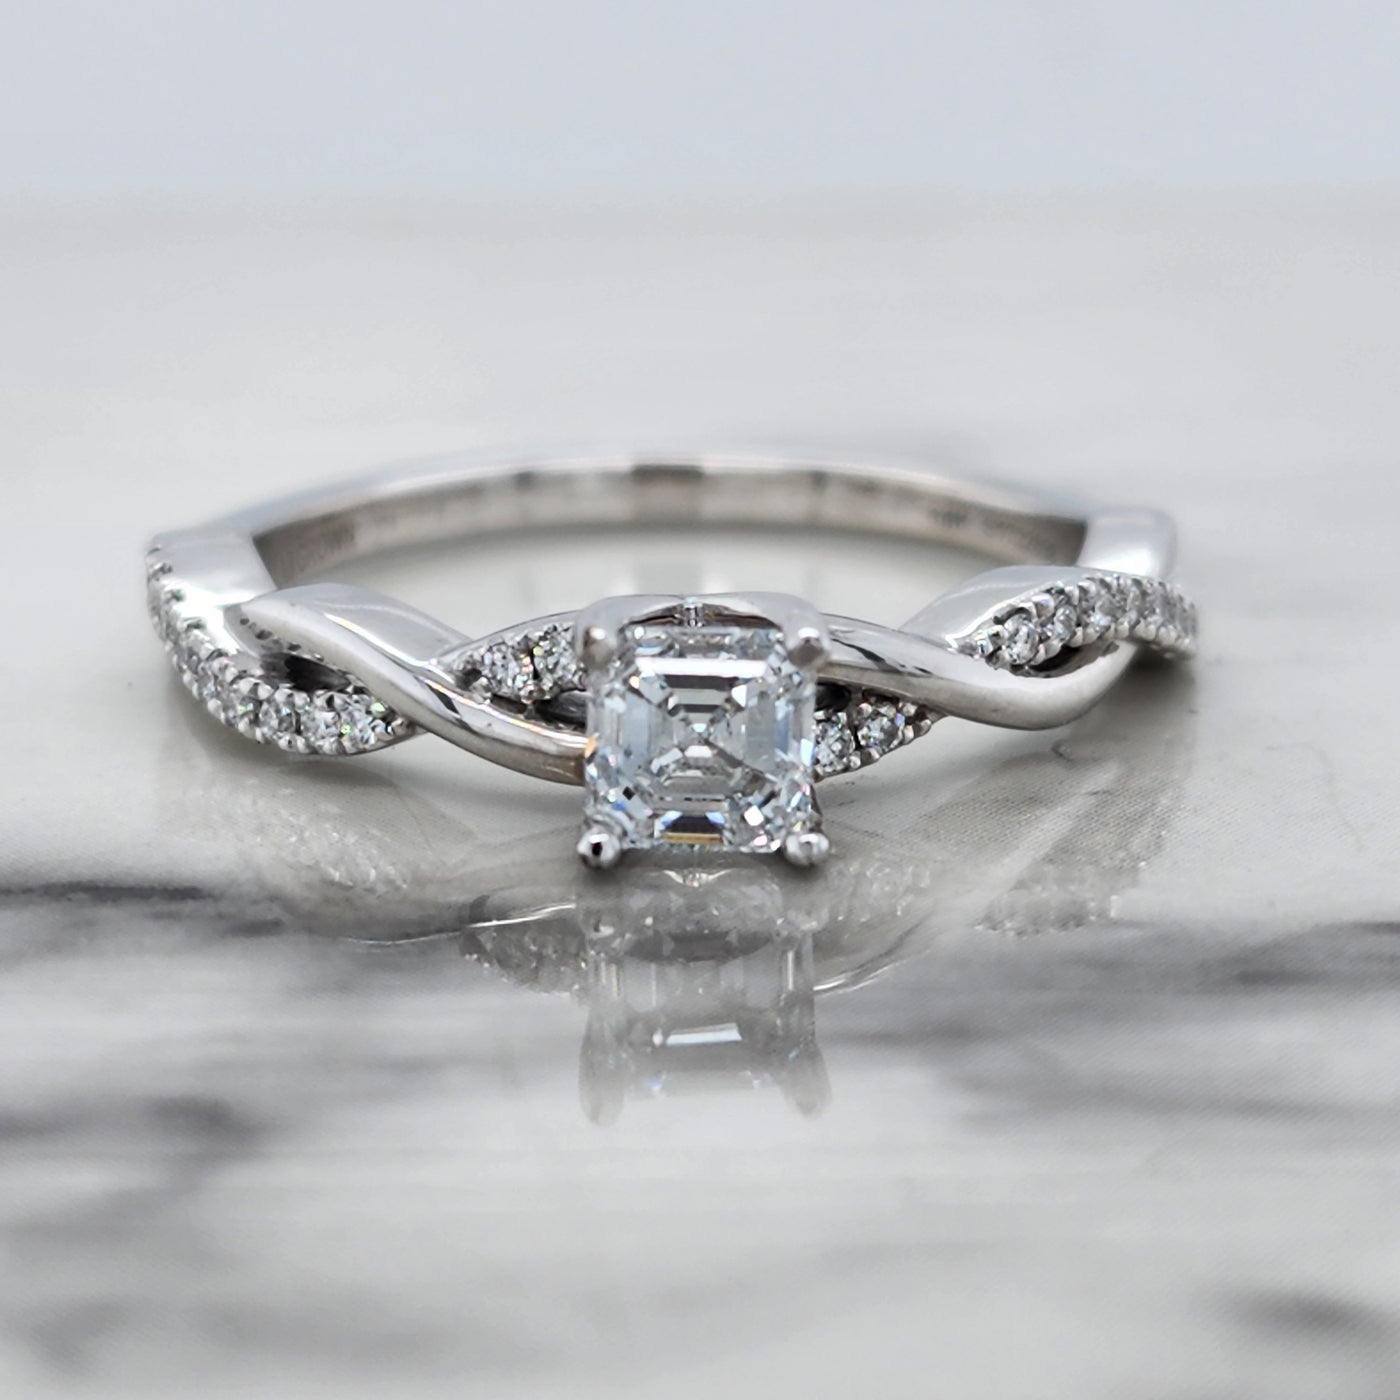 Custom White Gold Engagement Ring With Asscher Cut Center and Round Accent Stones